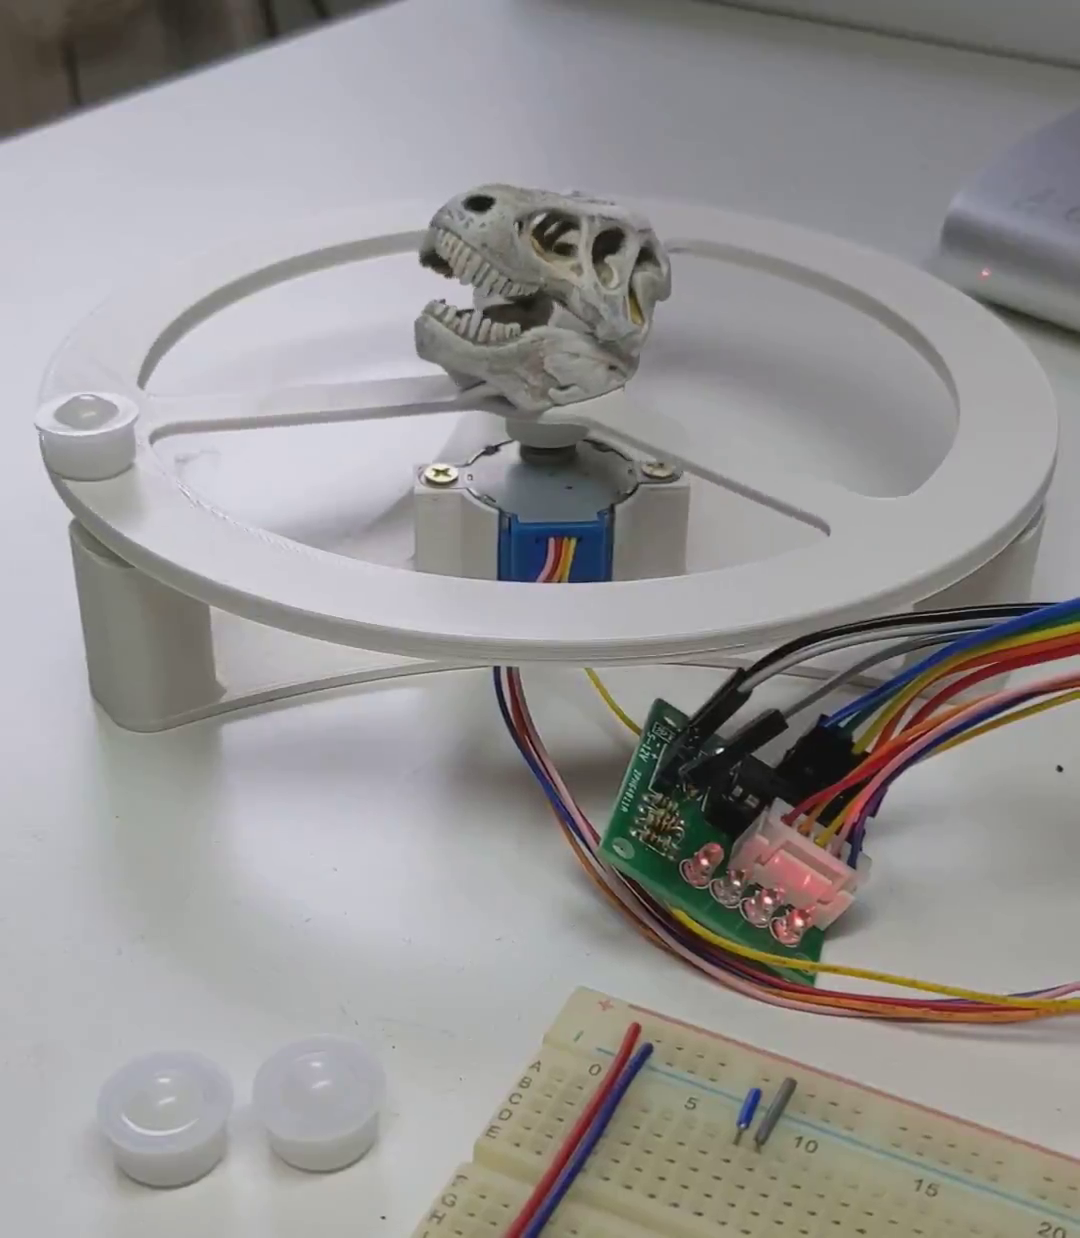 Motorized Turntable for Video, Photo, and 3D Scanning (DIY) - PCBurn